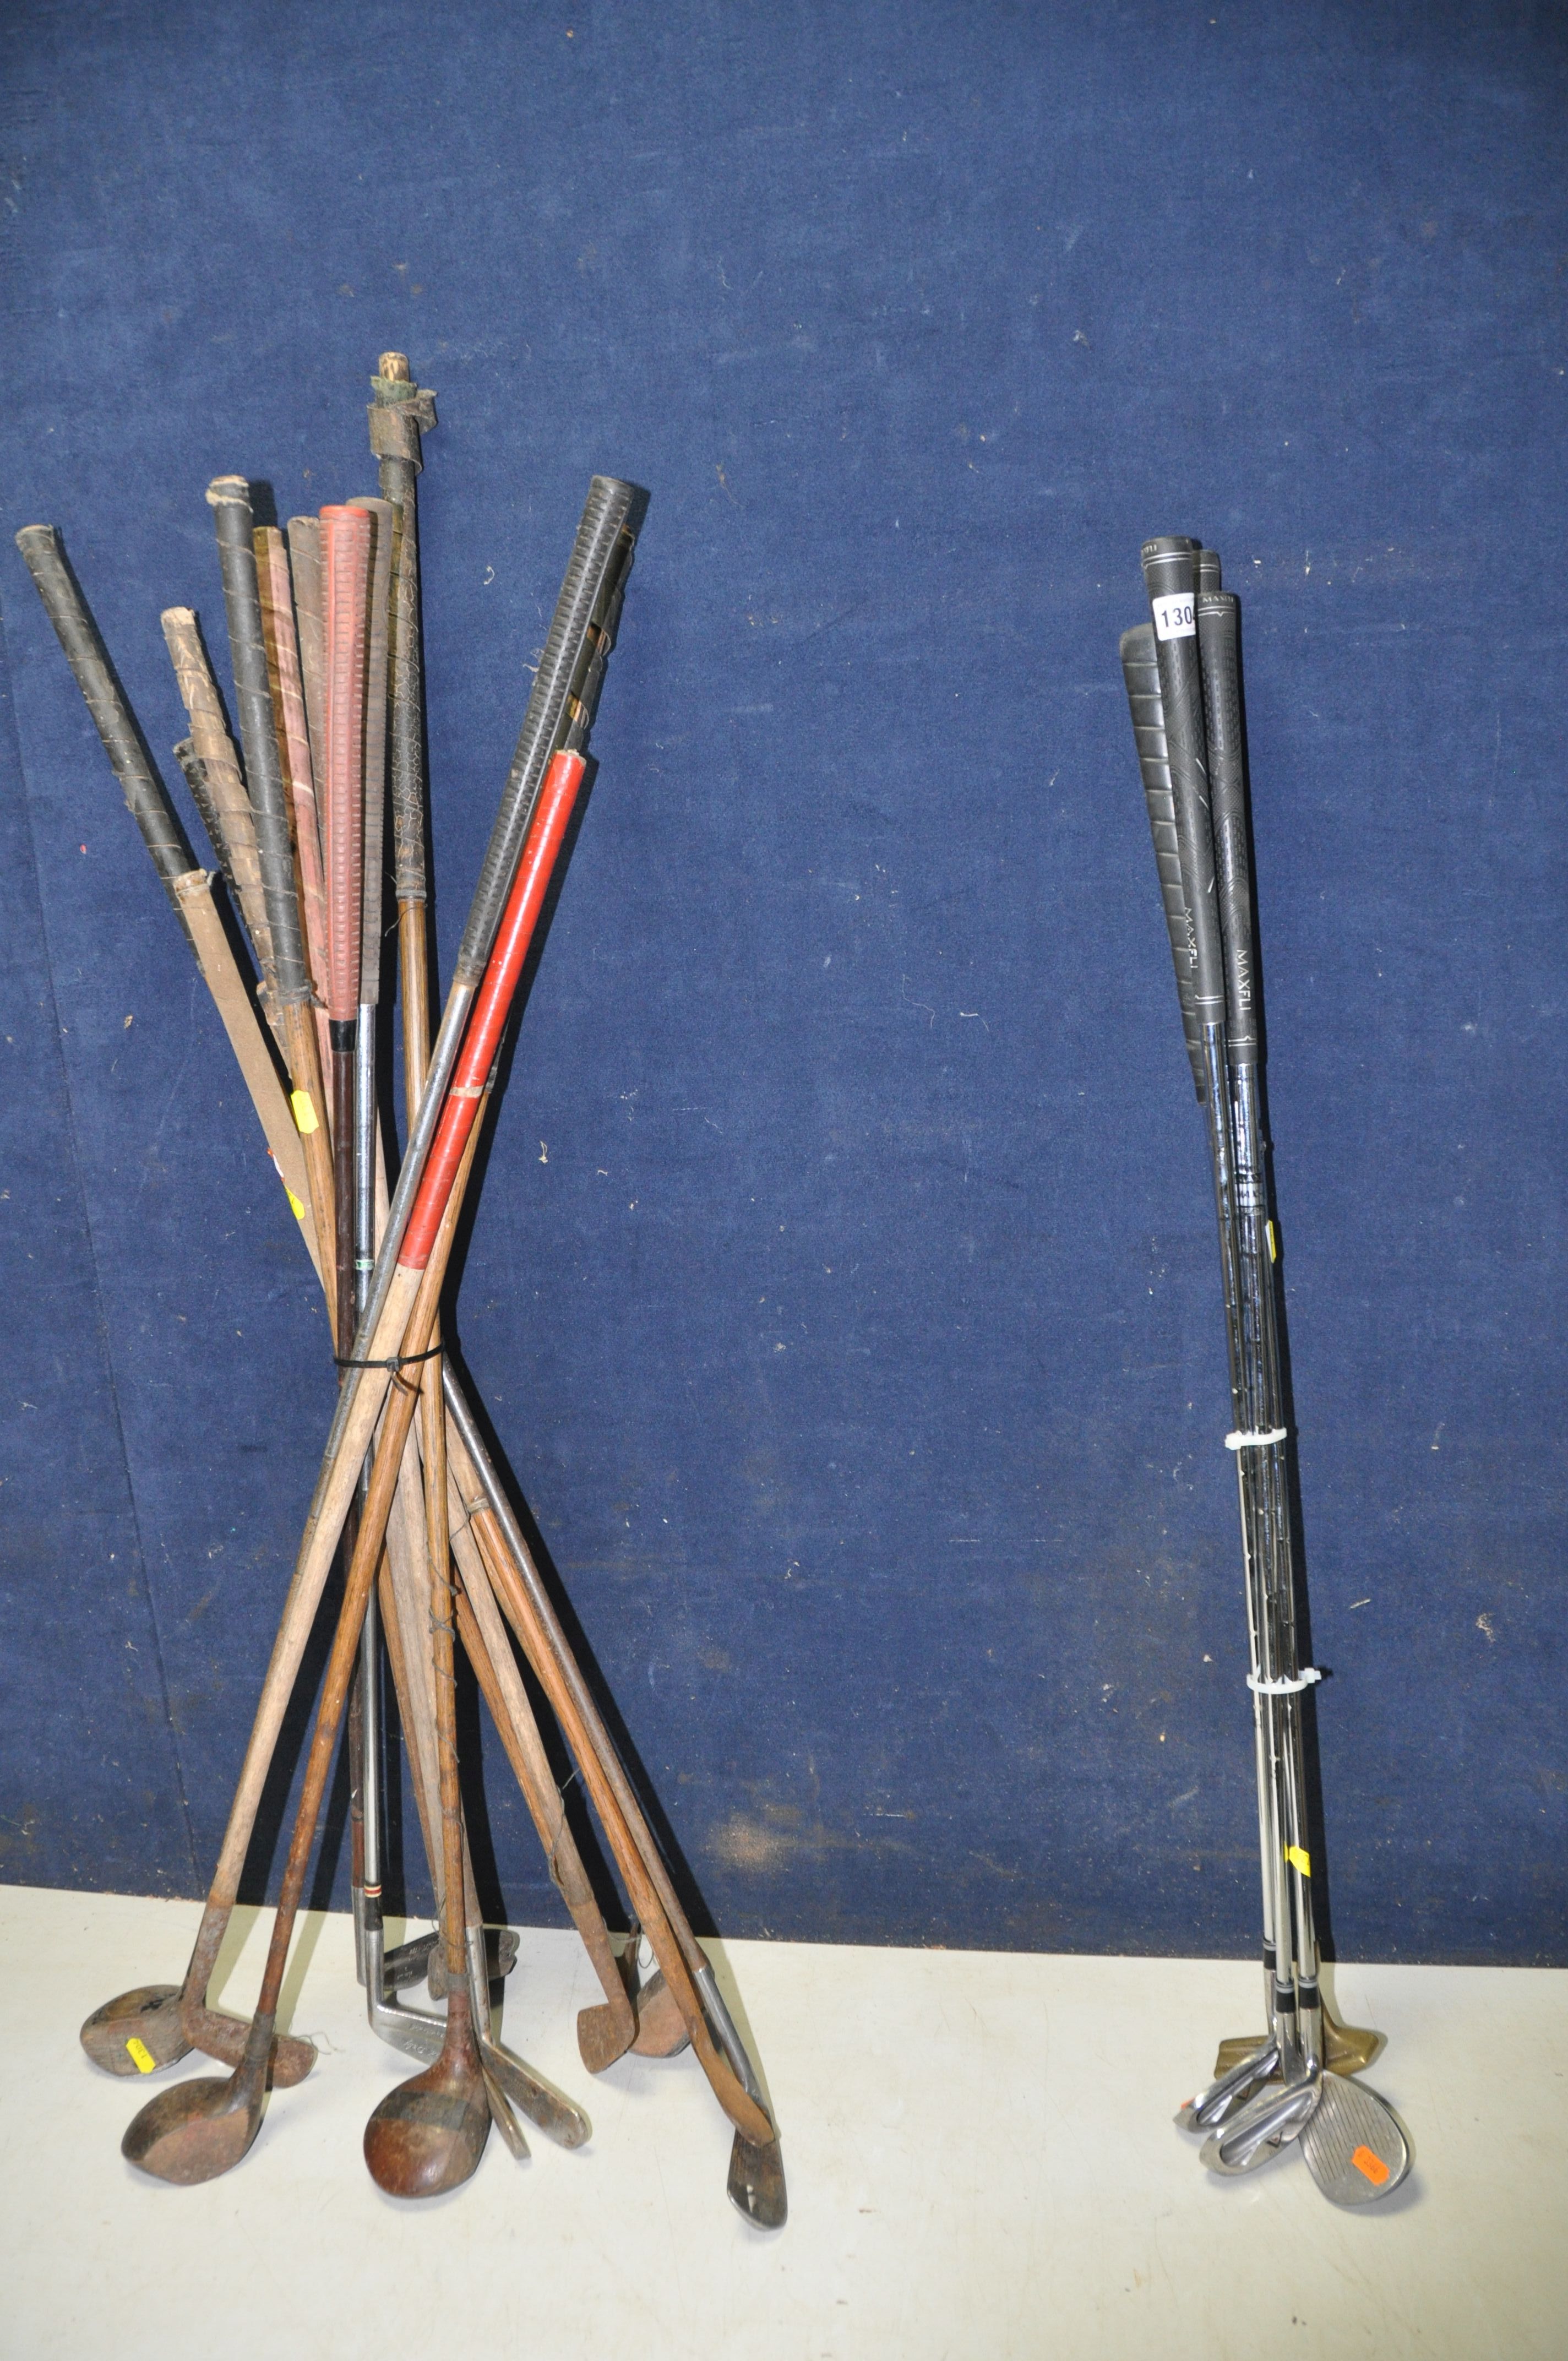 A COLLECTION OF VINTAGE AND HICKORY SHAFTED GOLF CLUBS fourteen vintage golf clubs along with four